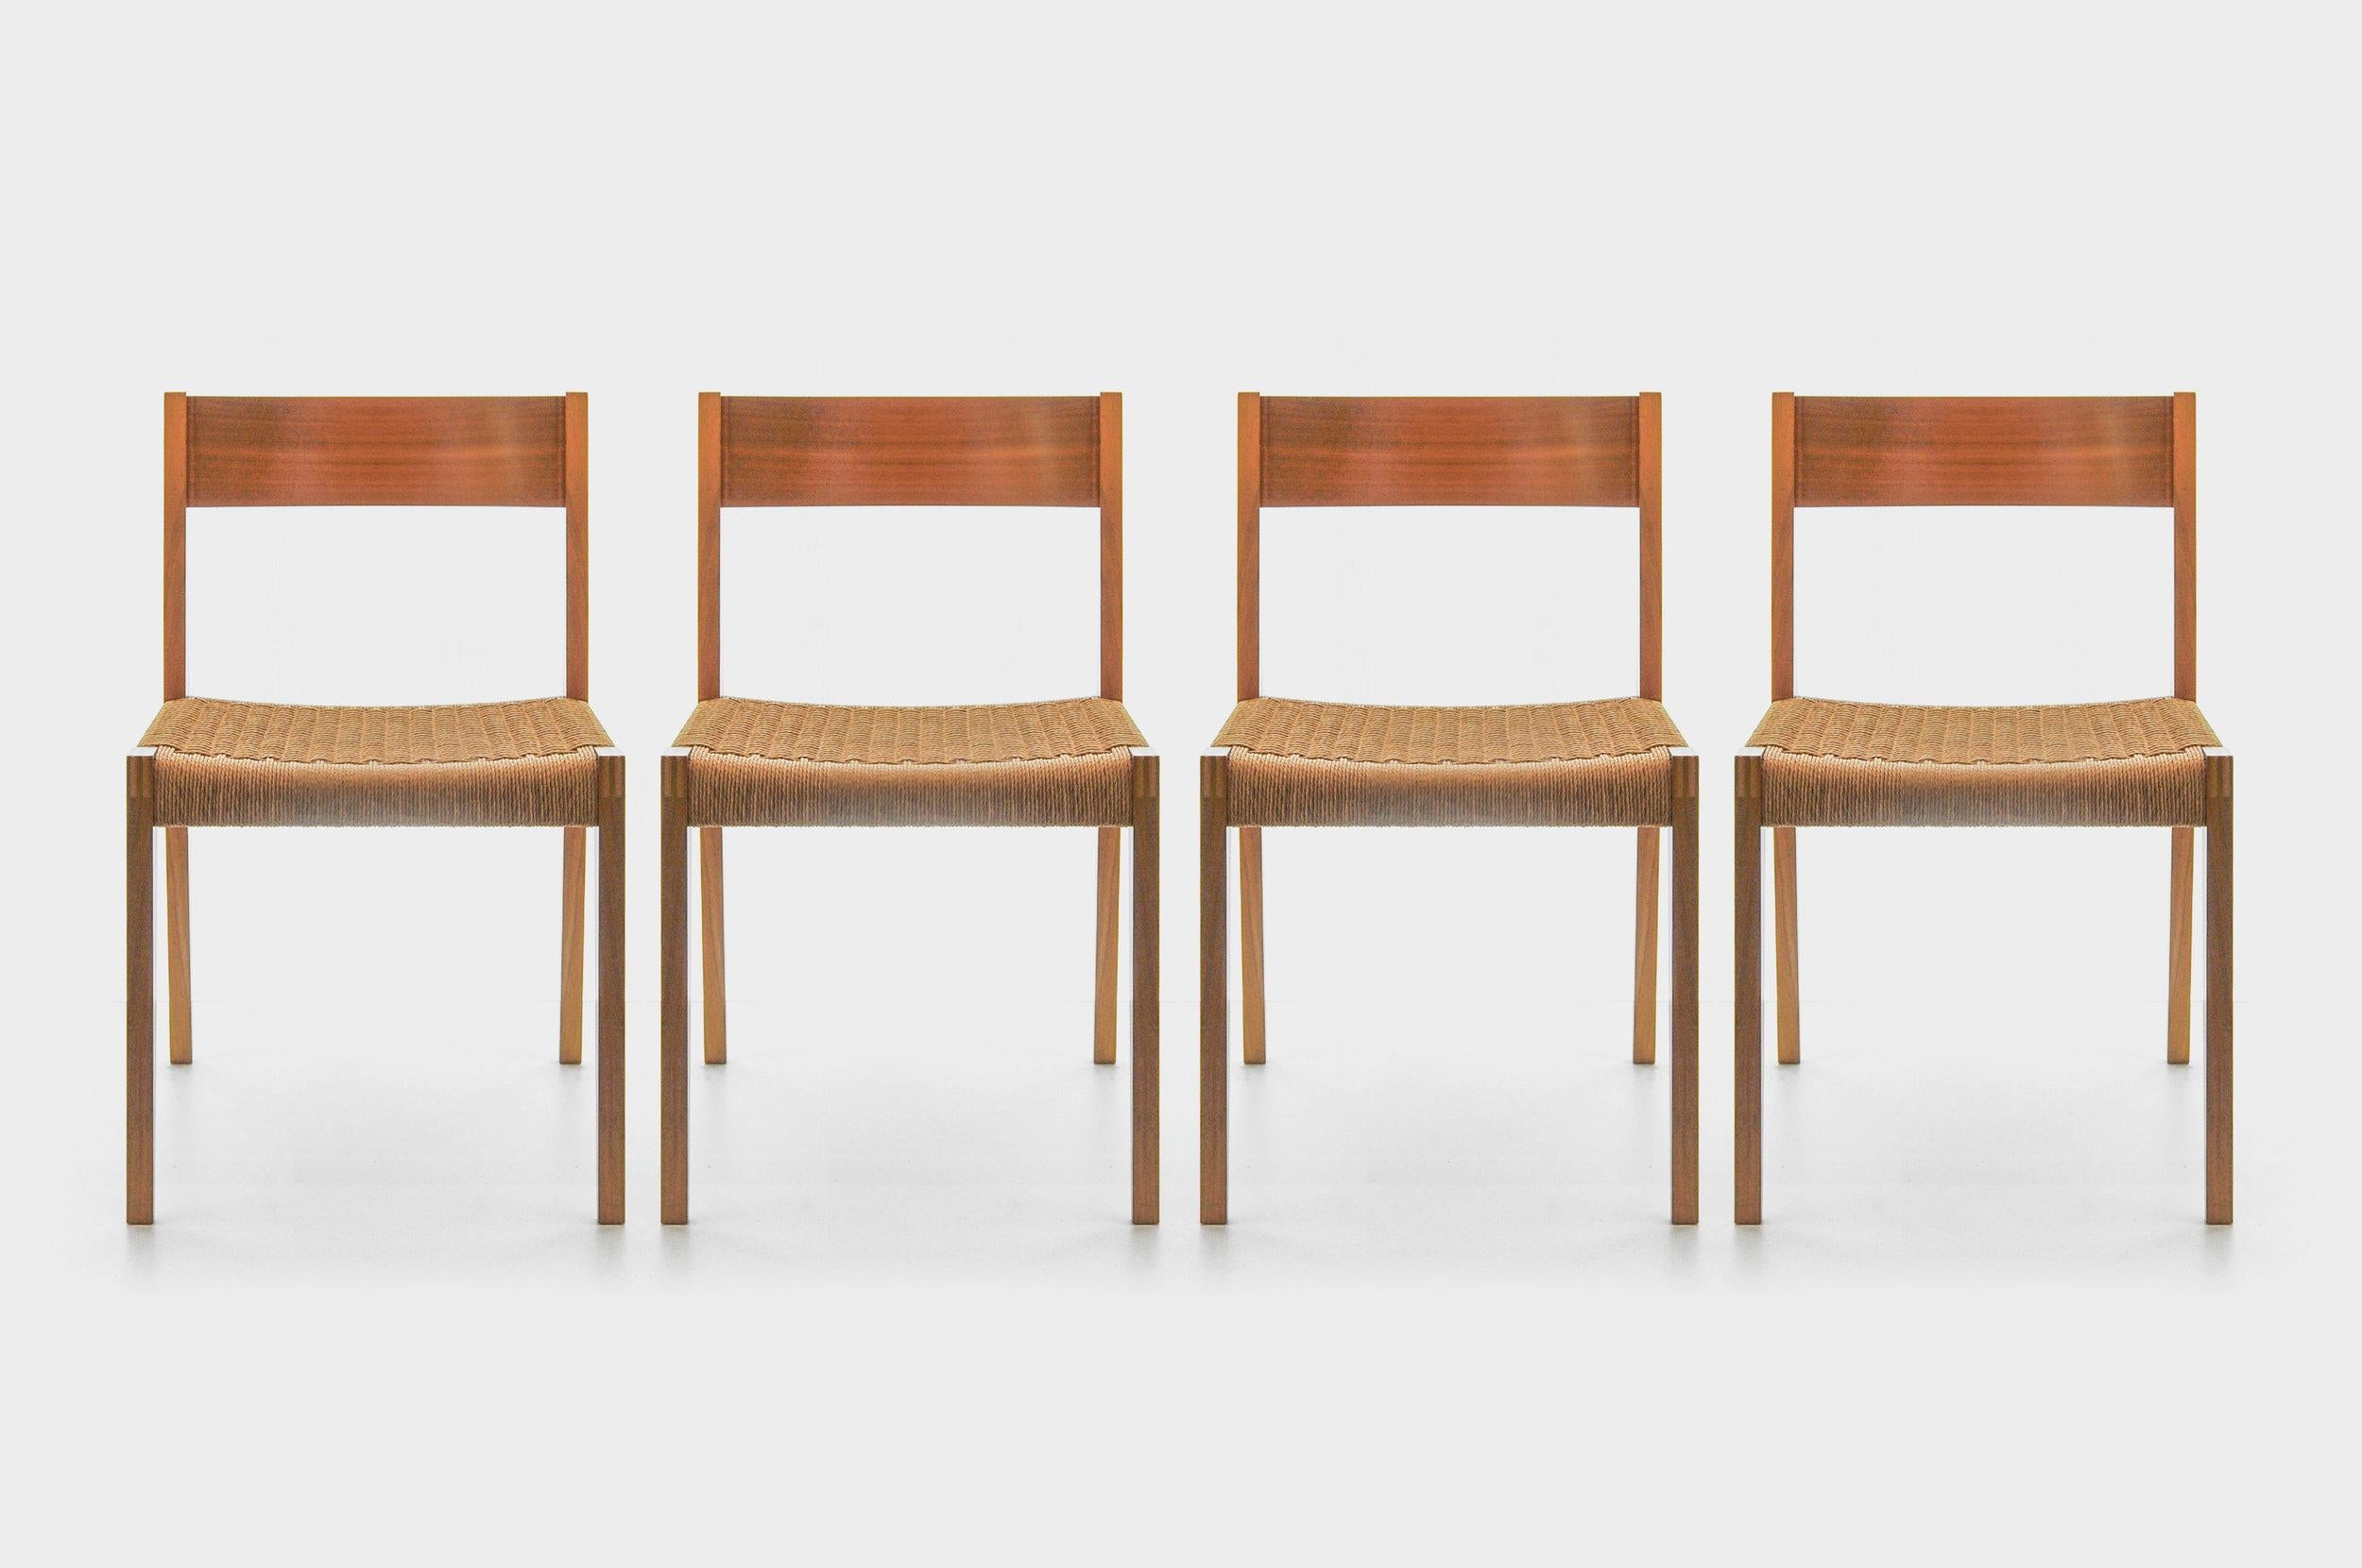 Simple, elegant dining chairs designed by Poul Cadovious. Built by the Swiss manufacturer Girsberger. Very nice workmanship with finger-jointed front legs and filigree curved backrest made of plywood. The hand woven raffia is everywhere intact, firm